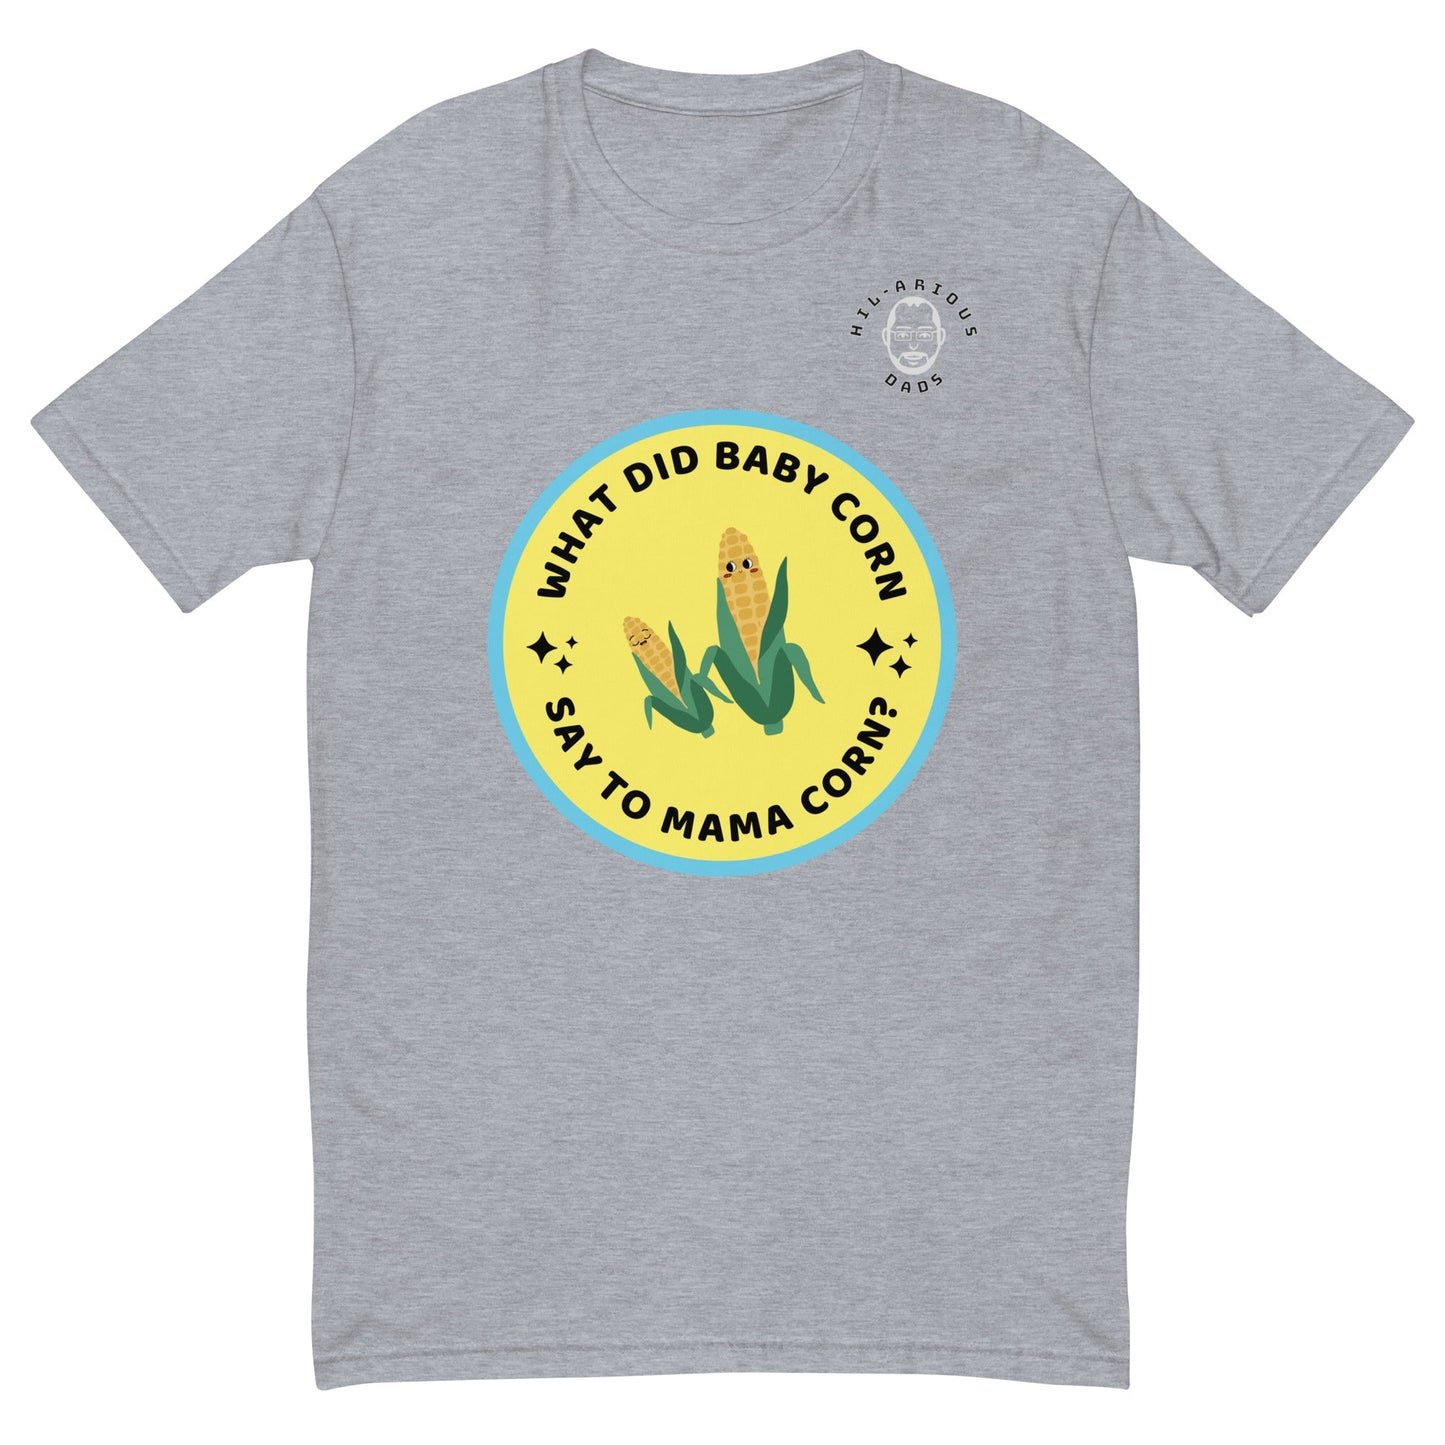 What did baby corn say to mama corn?-T-shirt - Hil-arious Dads